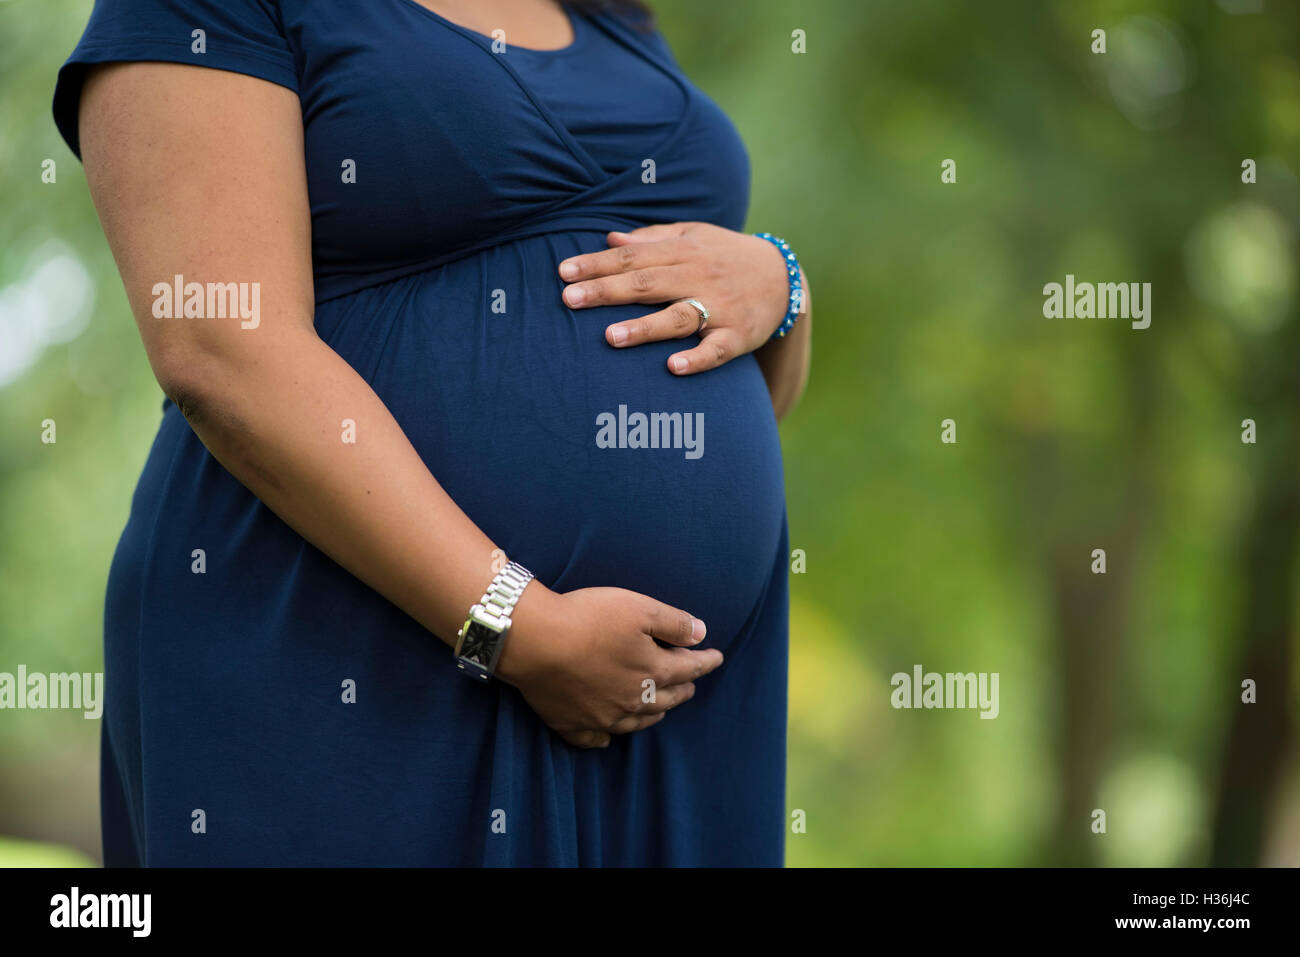 A heavily pregnant woman holds her stomach outdoors against a blurred background. Stock Photo